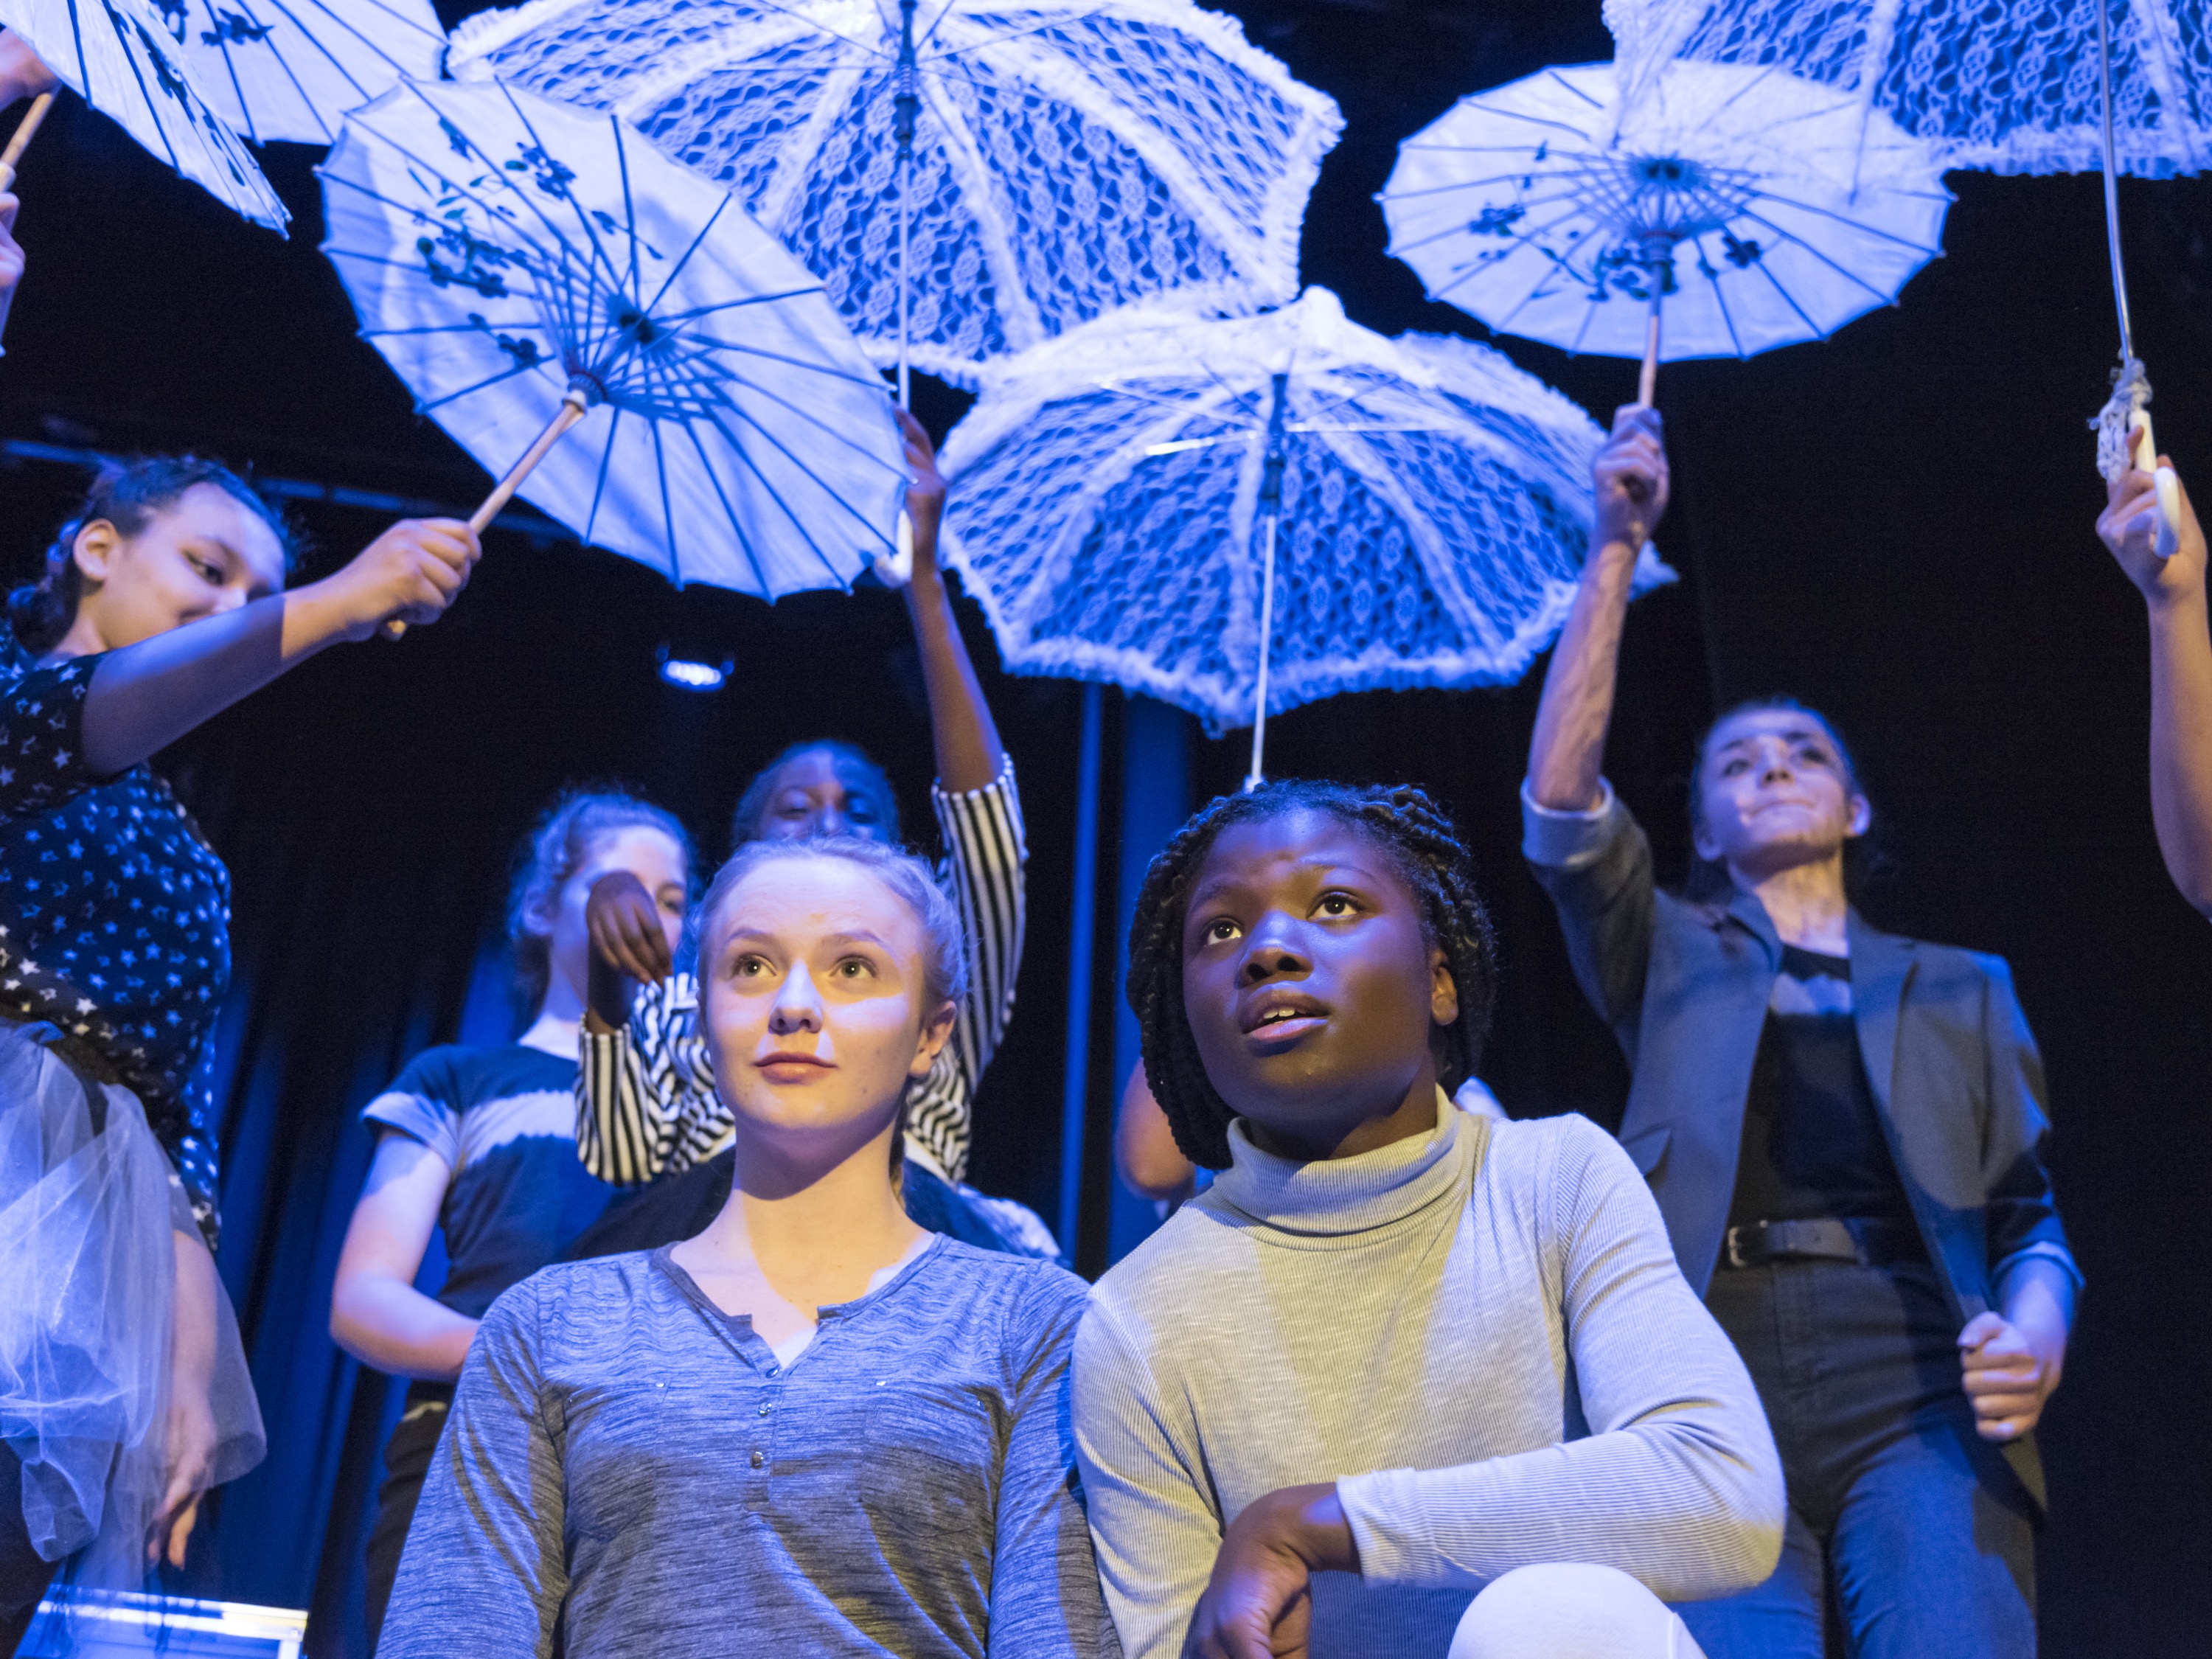 Teenagers on a theatre stage perform in front of brightly lit umbrellas.